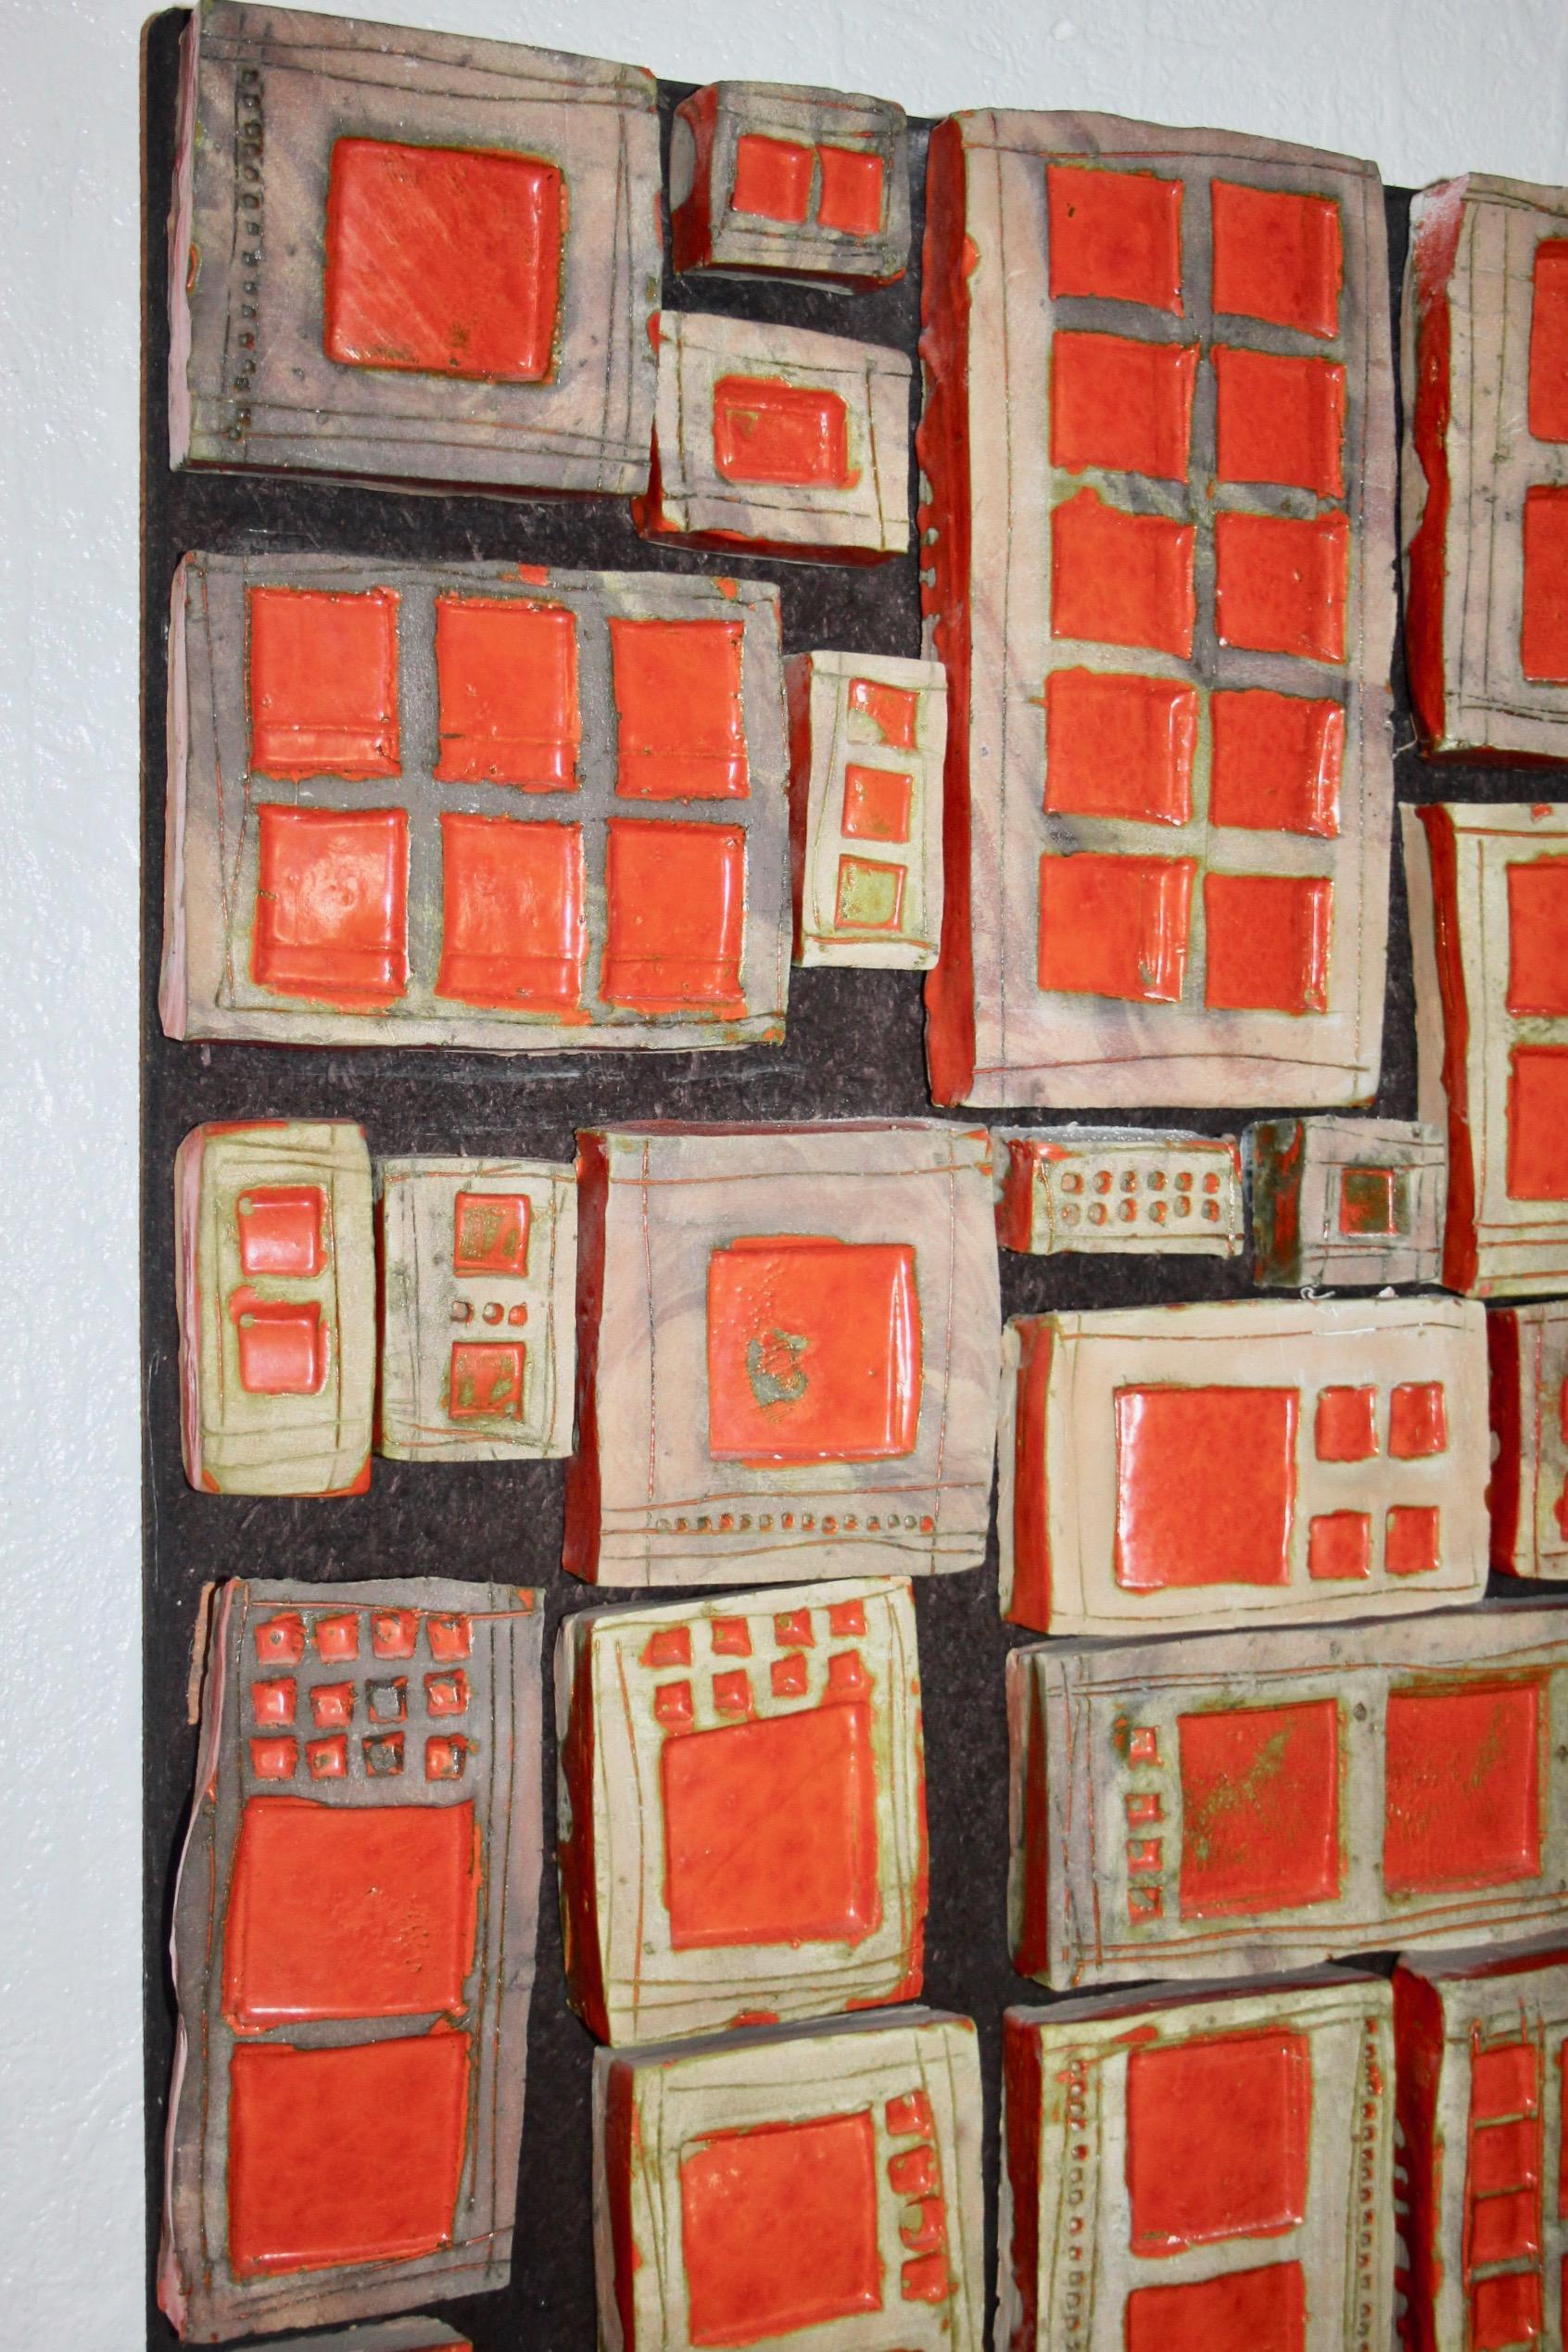 Ceramic Roger Capron style ceramic block wall panel glued to wood For Sale